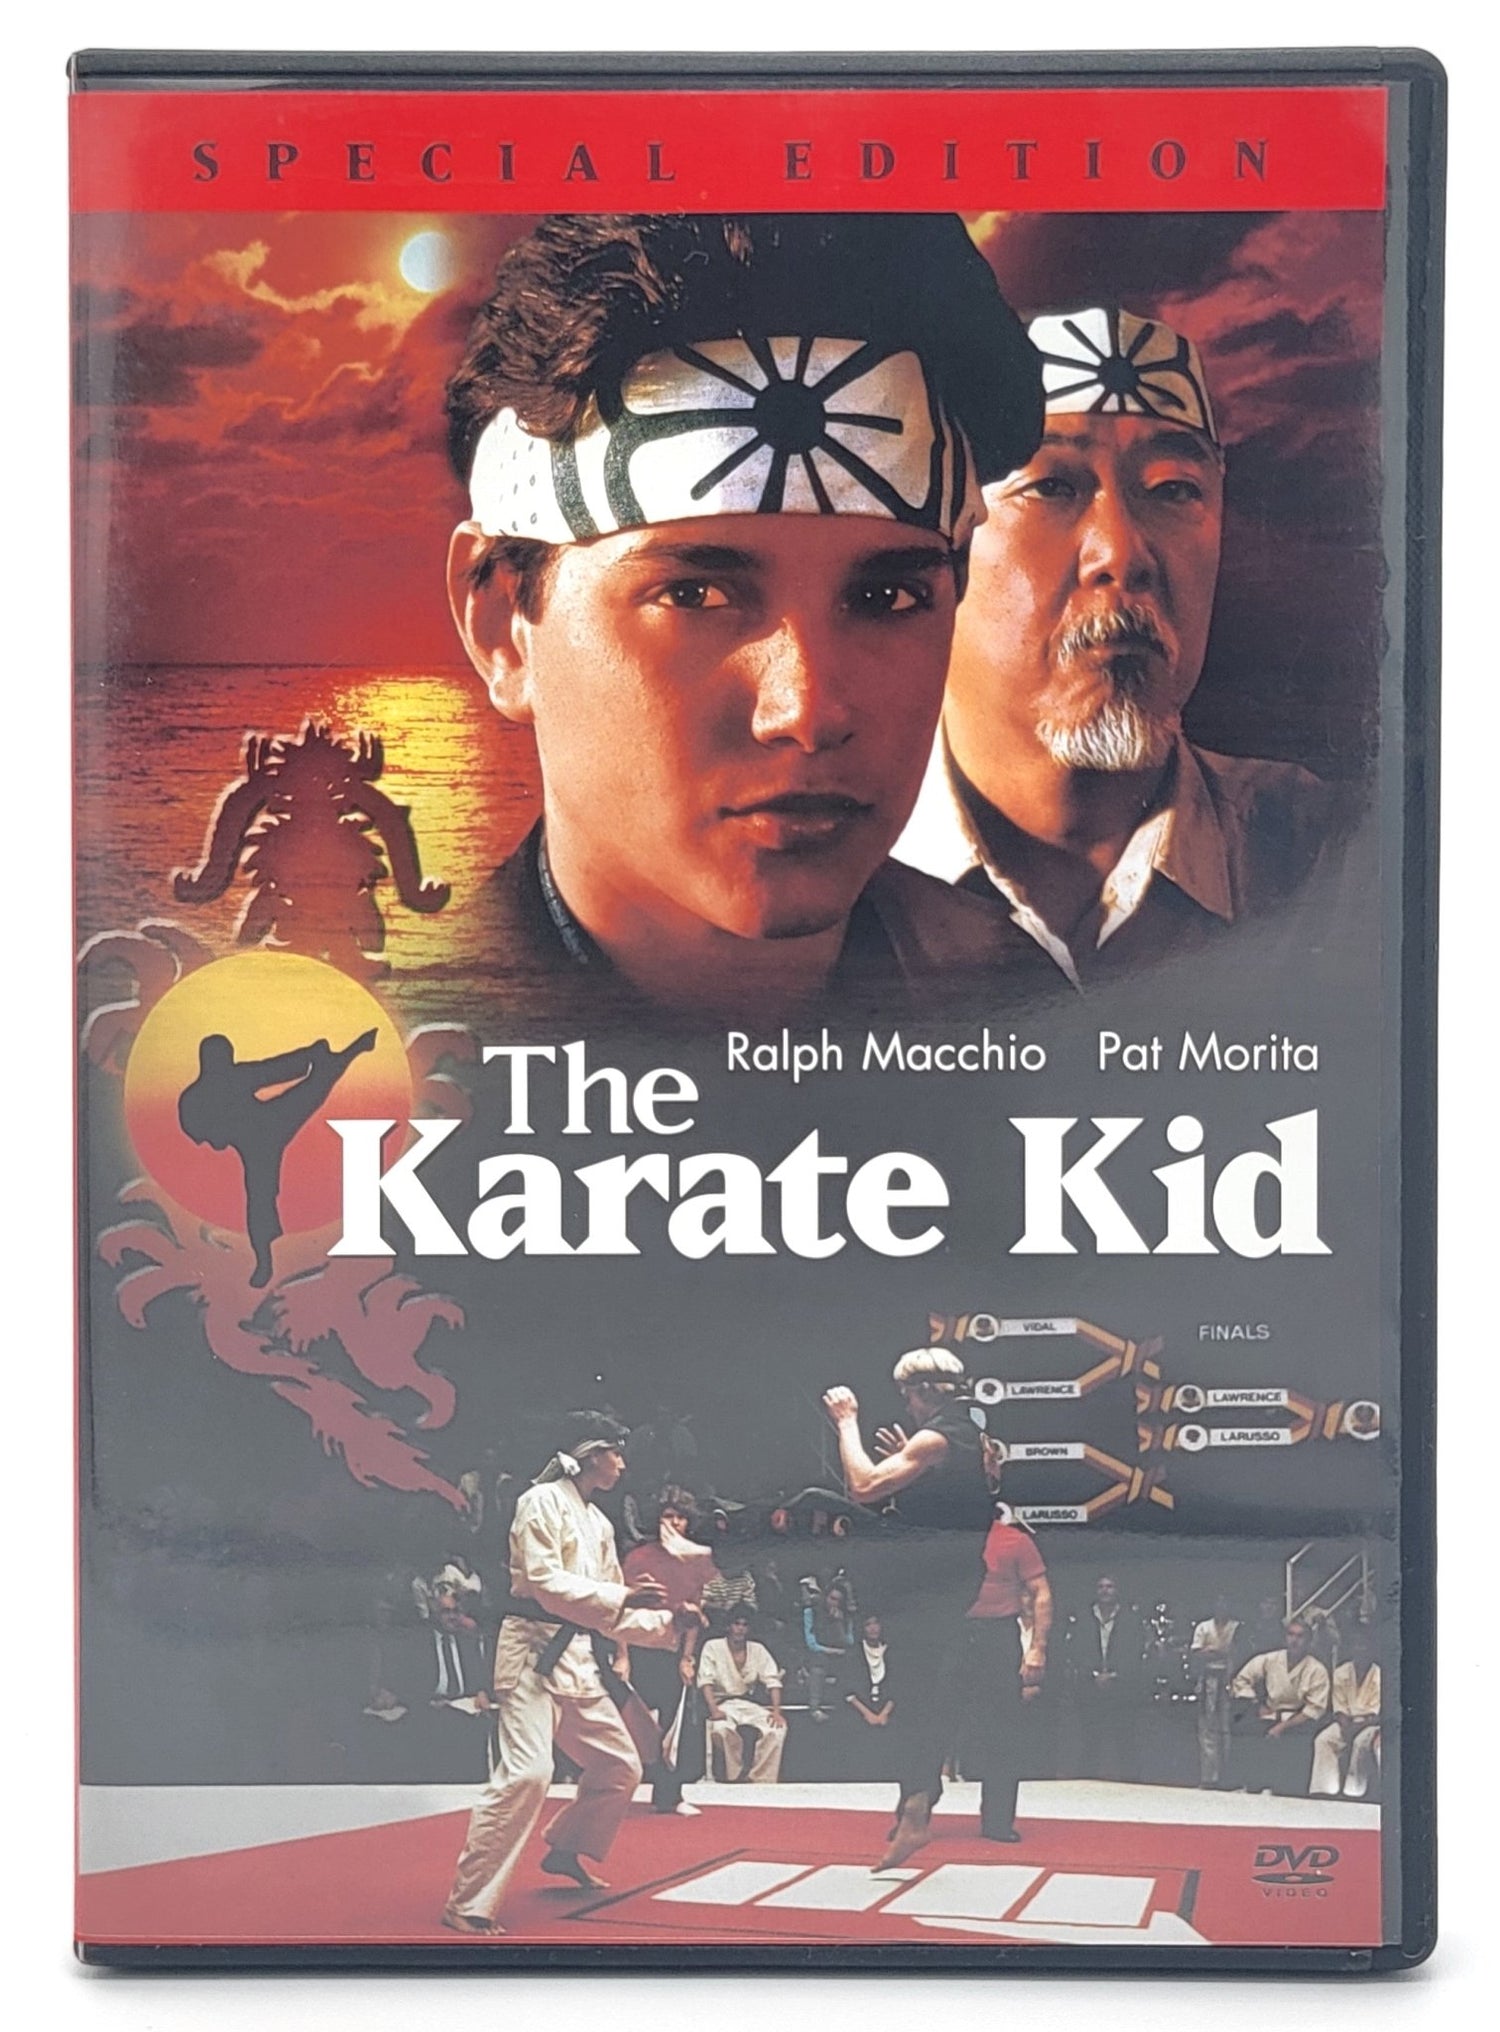 Columbia Pictures - The Karate Kid | DVD | Special Edition - Widescreen - DVD - Steady Bunny Shop